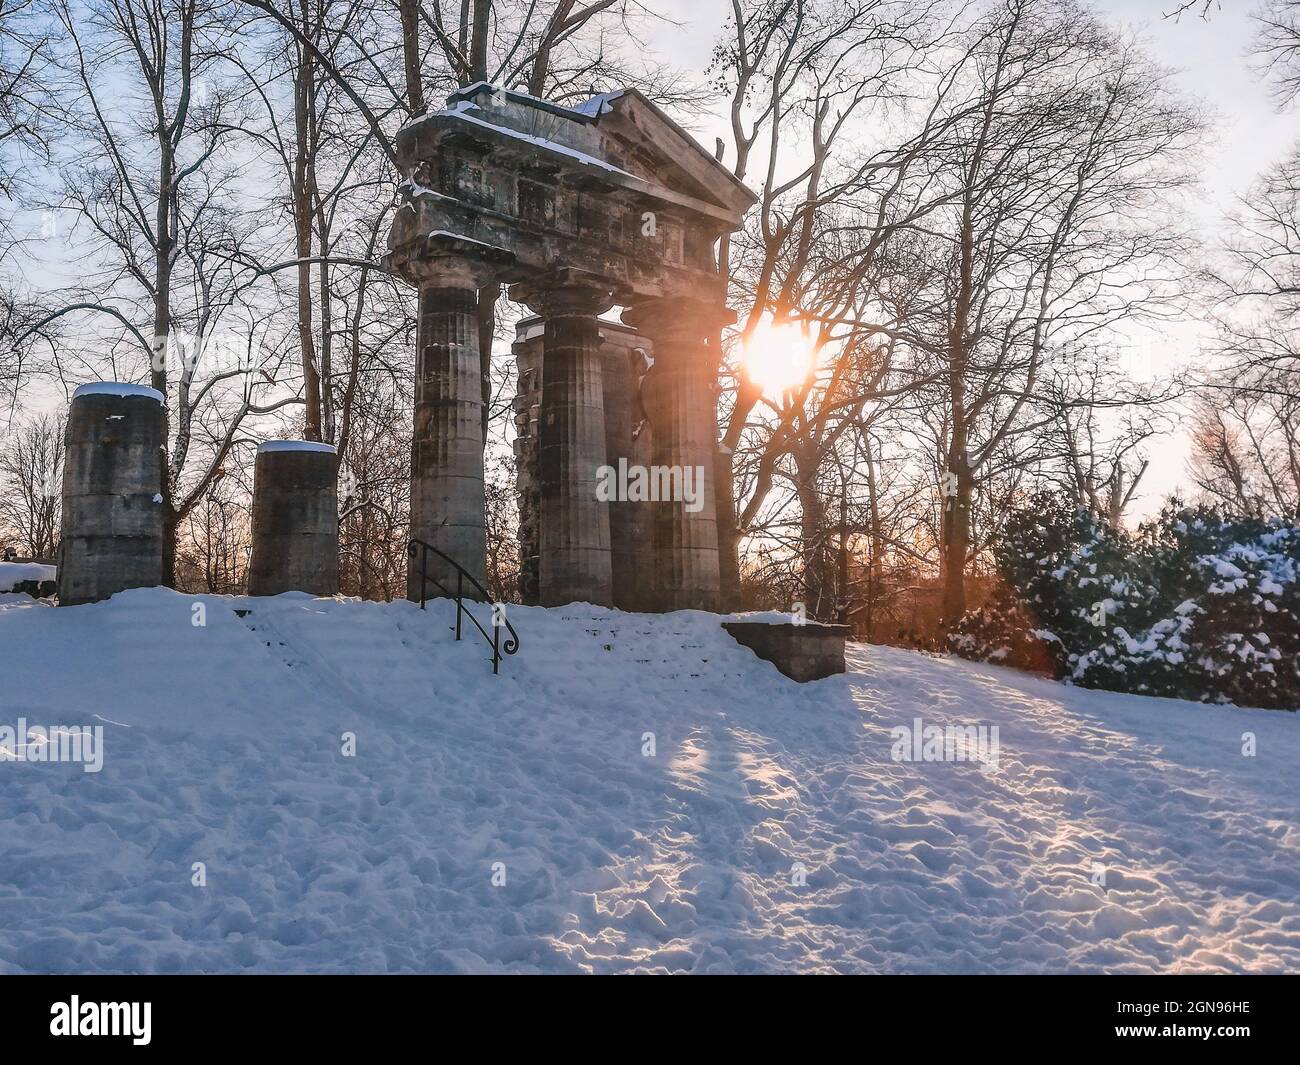 Portikus in Braunschweig. Historical building in city park. Snow covered landscape on a sunny day in Braunschweig, Germany Stock Photo